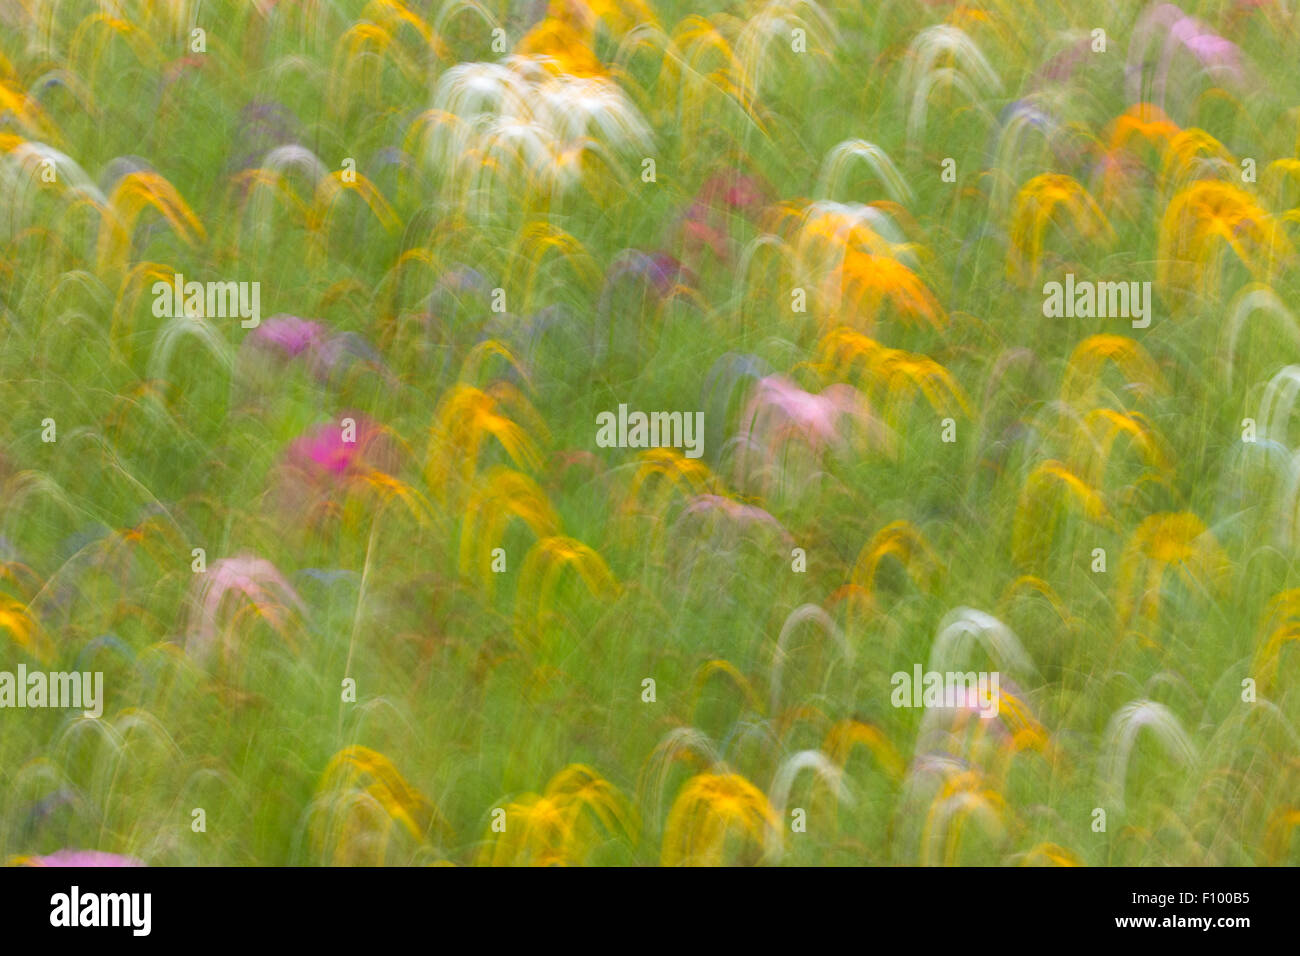 Summer meadow, flower meadow, abstract image Stock Photo